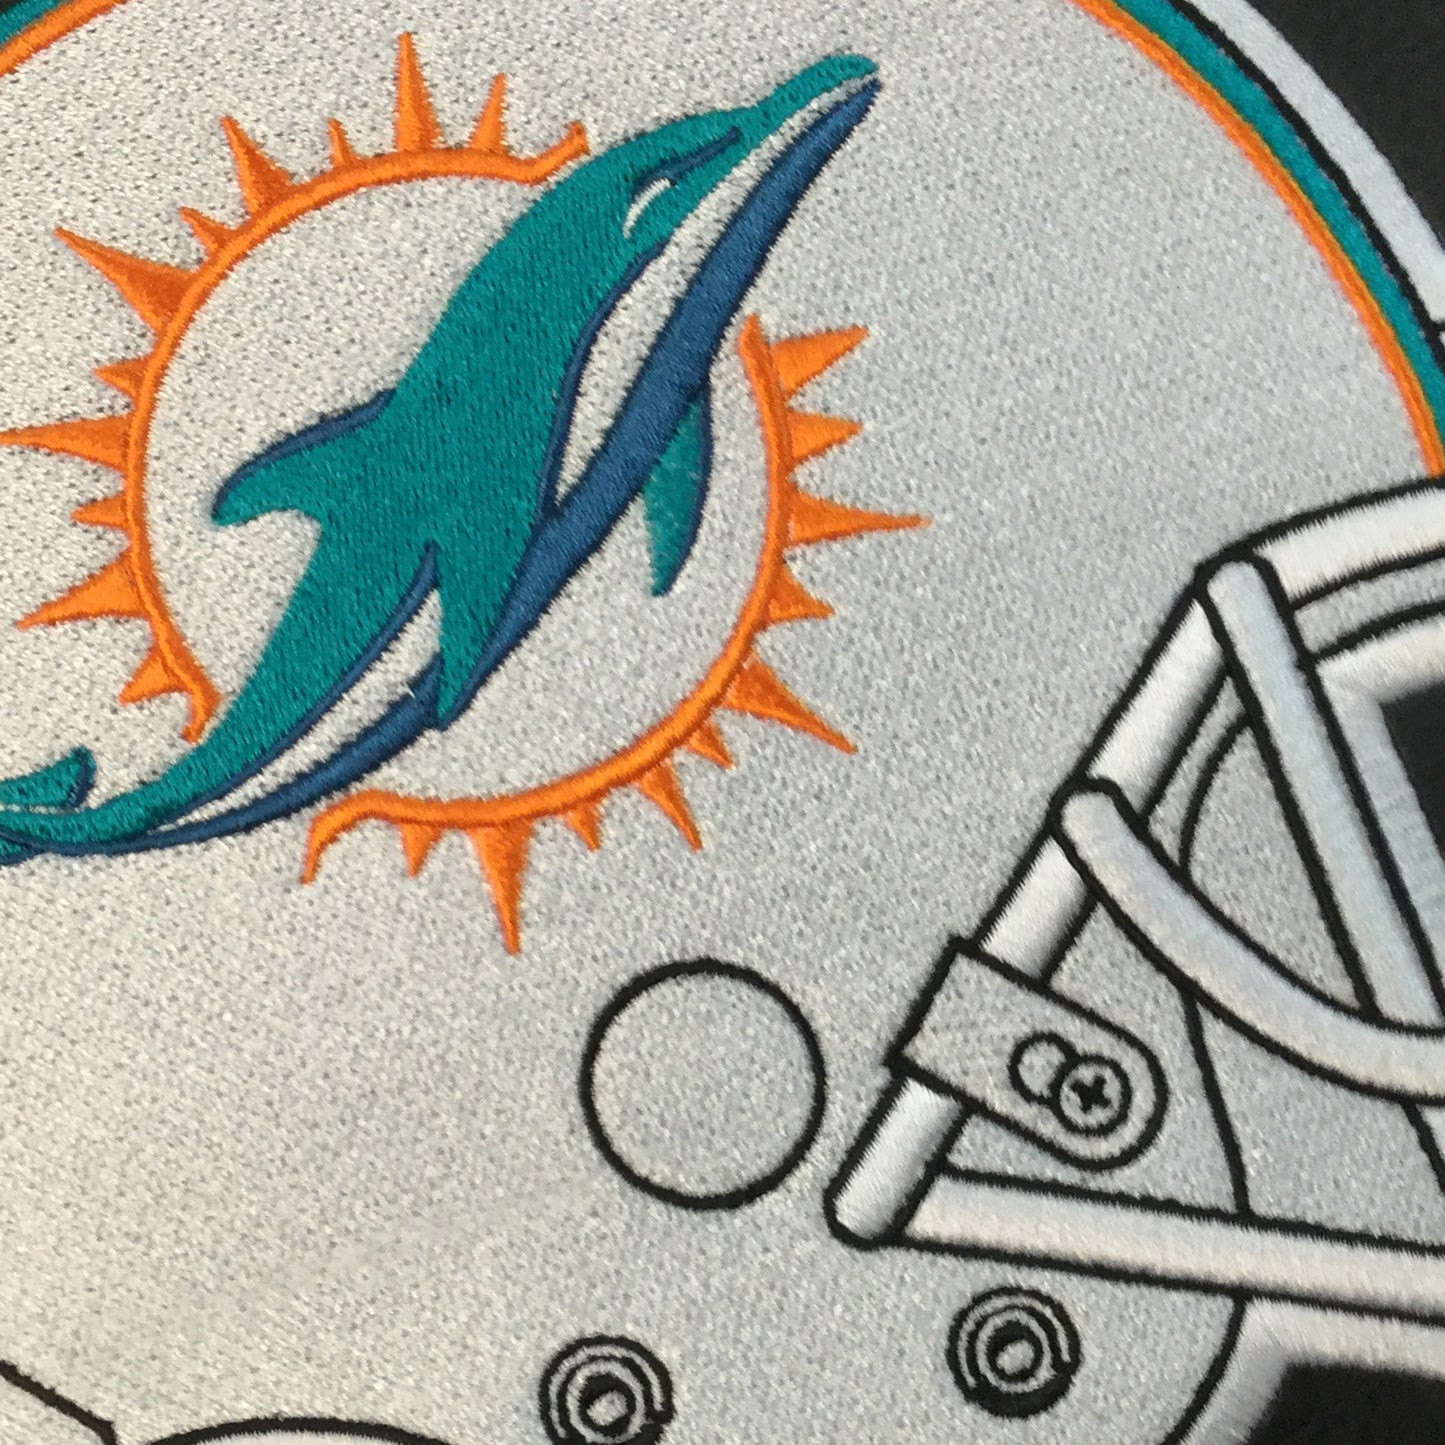 Xpression Pro Gaming Chair with  Miami Dolphins Helmet Logo